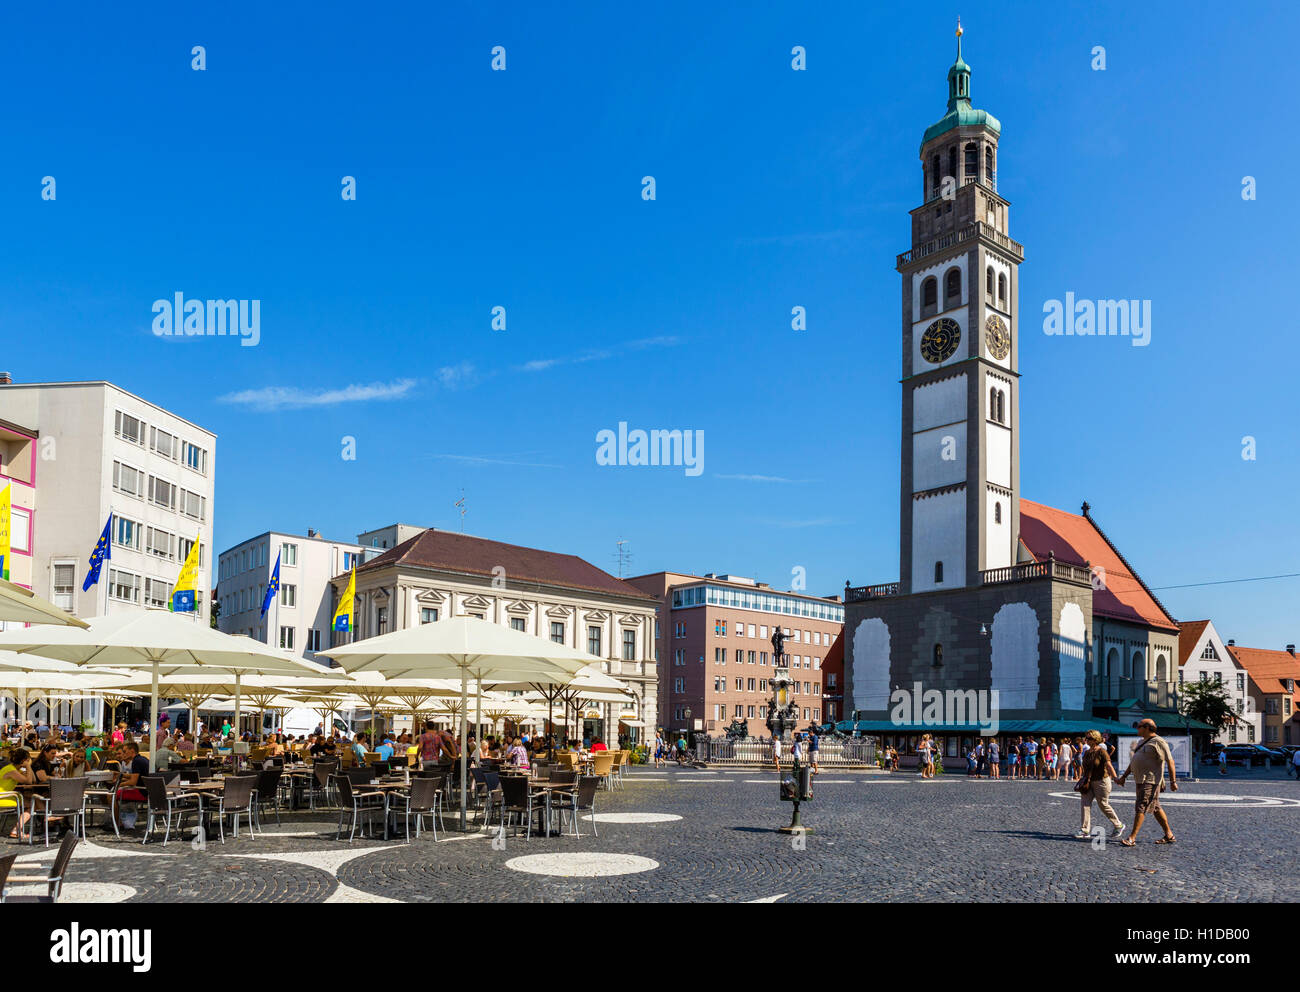 Cafe in Rathausplatz looking towards the Perlachturm (Perlach Tower) and church of St Peter, Augsburg, Bavaria, Germany Stock Photo